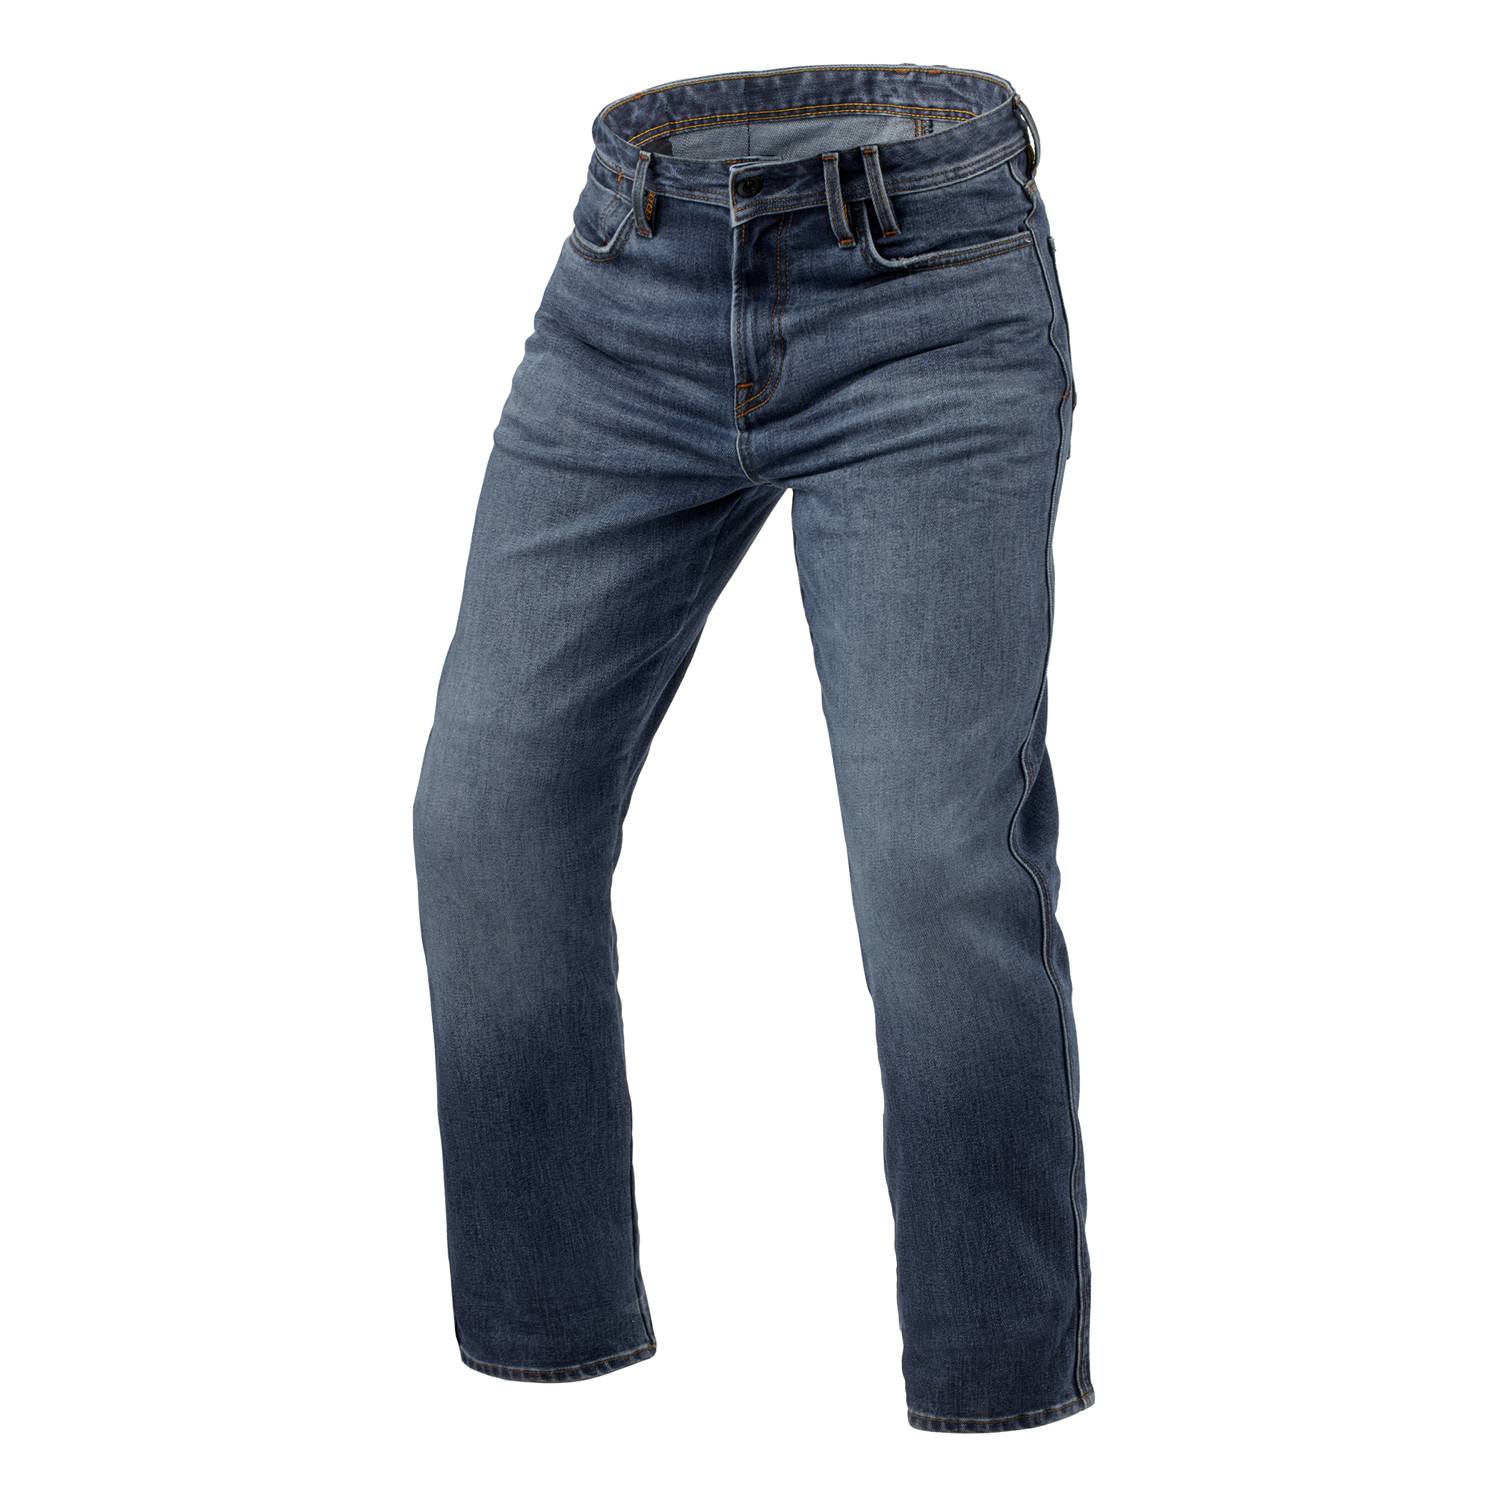 Image of REV'IT! Jeans Lombard 3 RF Mid Blue Stone L32 Motorcycle Jeans Taille L32/W30